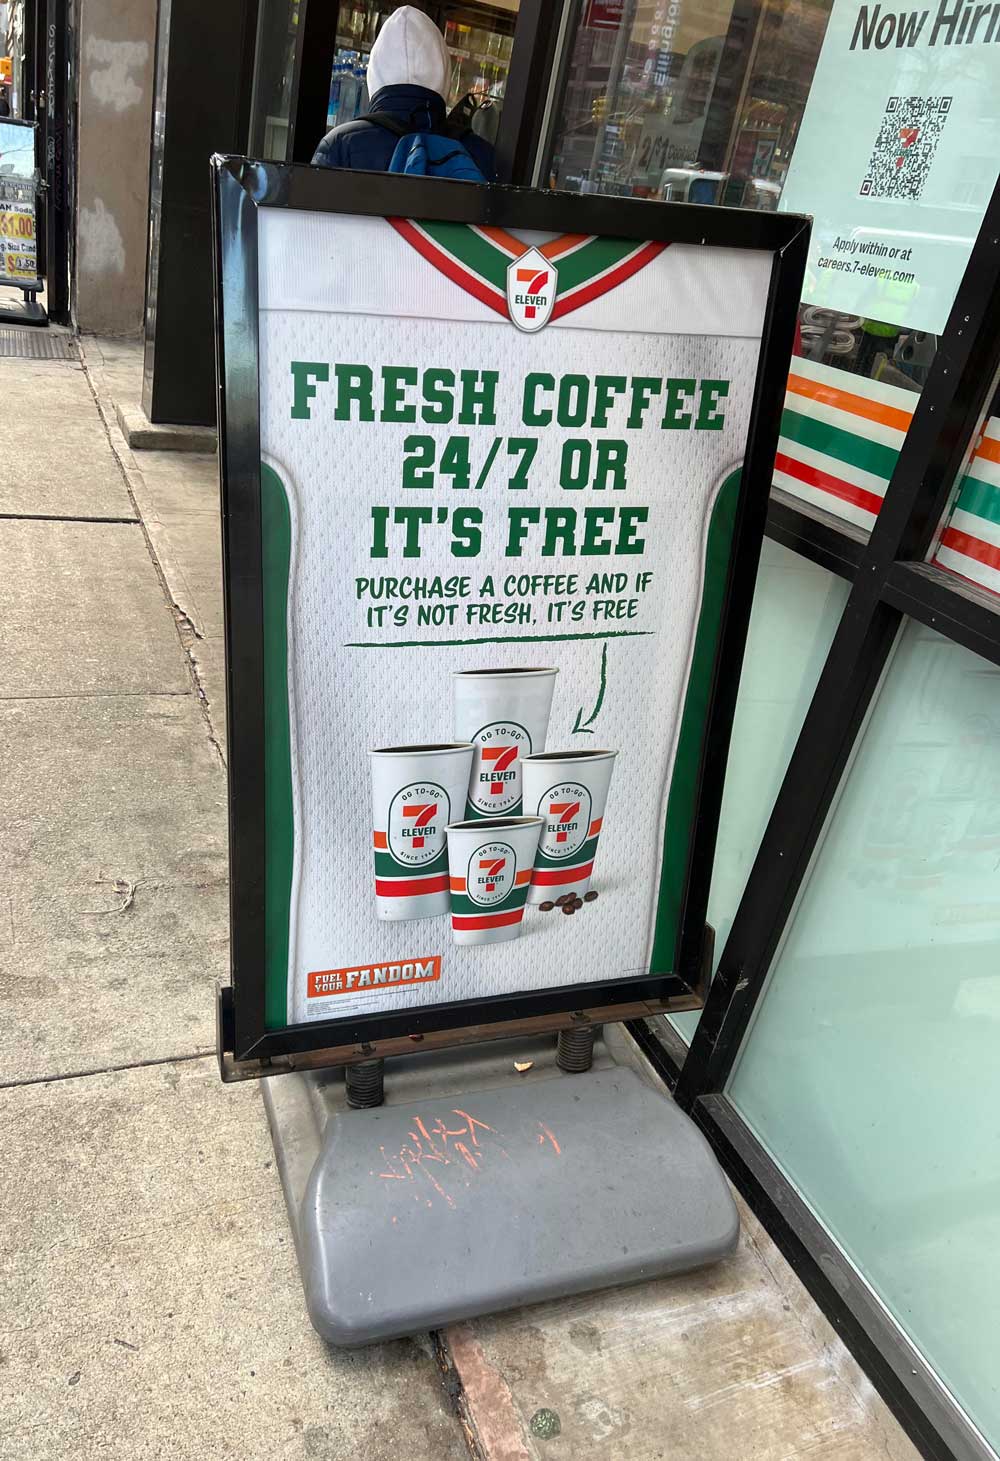 This advertisement for free stale coffee